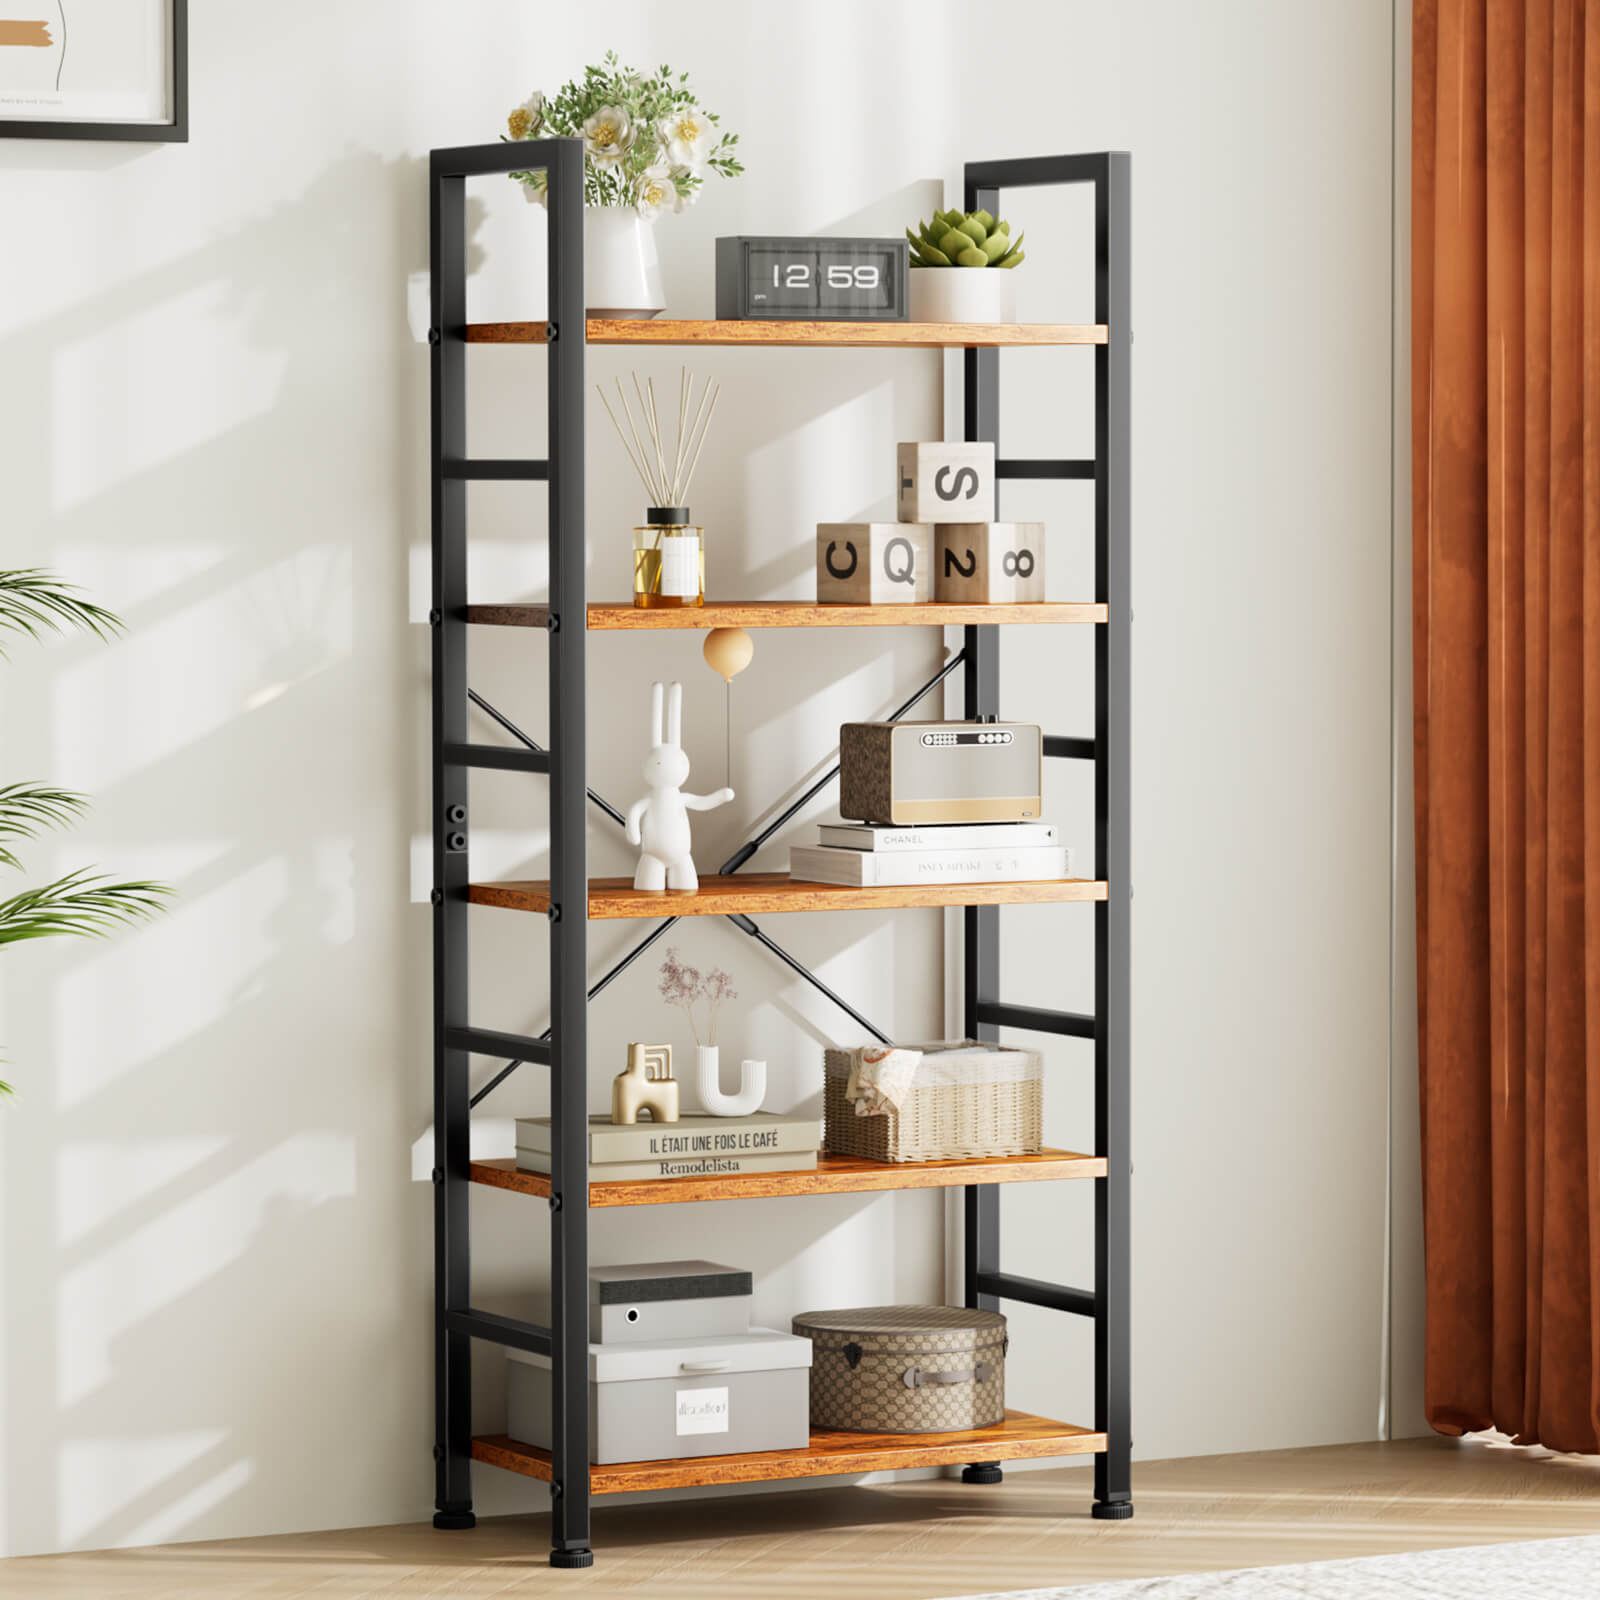 5-Tier Bookcase - Tall Bookshelf Modern Book Case for Books, Garage Kit, CDs, Movies,  for Bedroom Home Office Kitchen Living Room